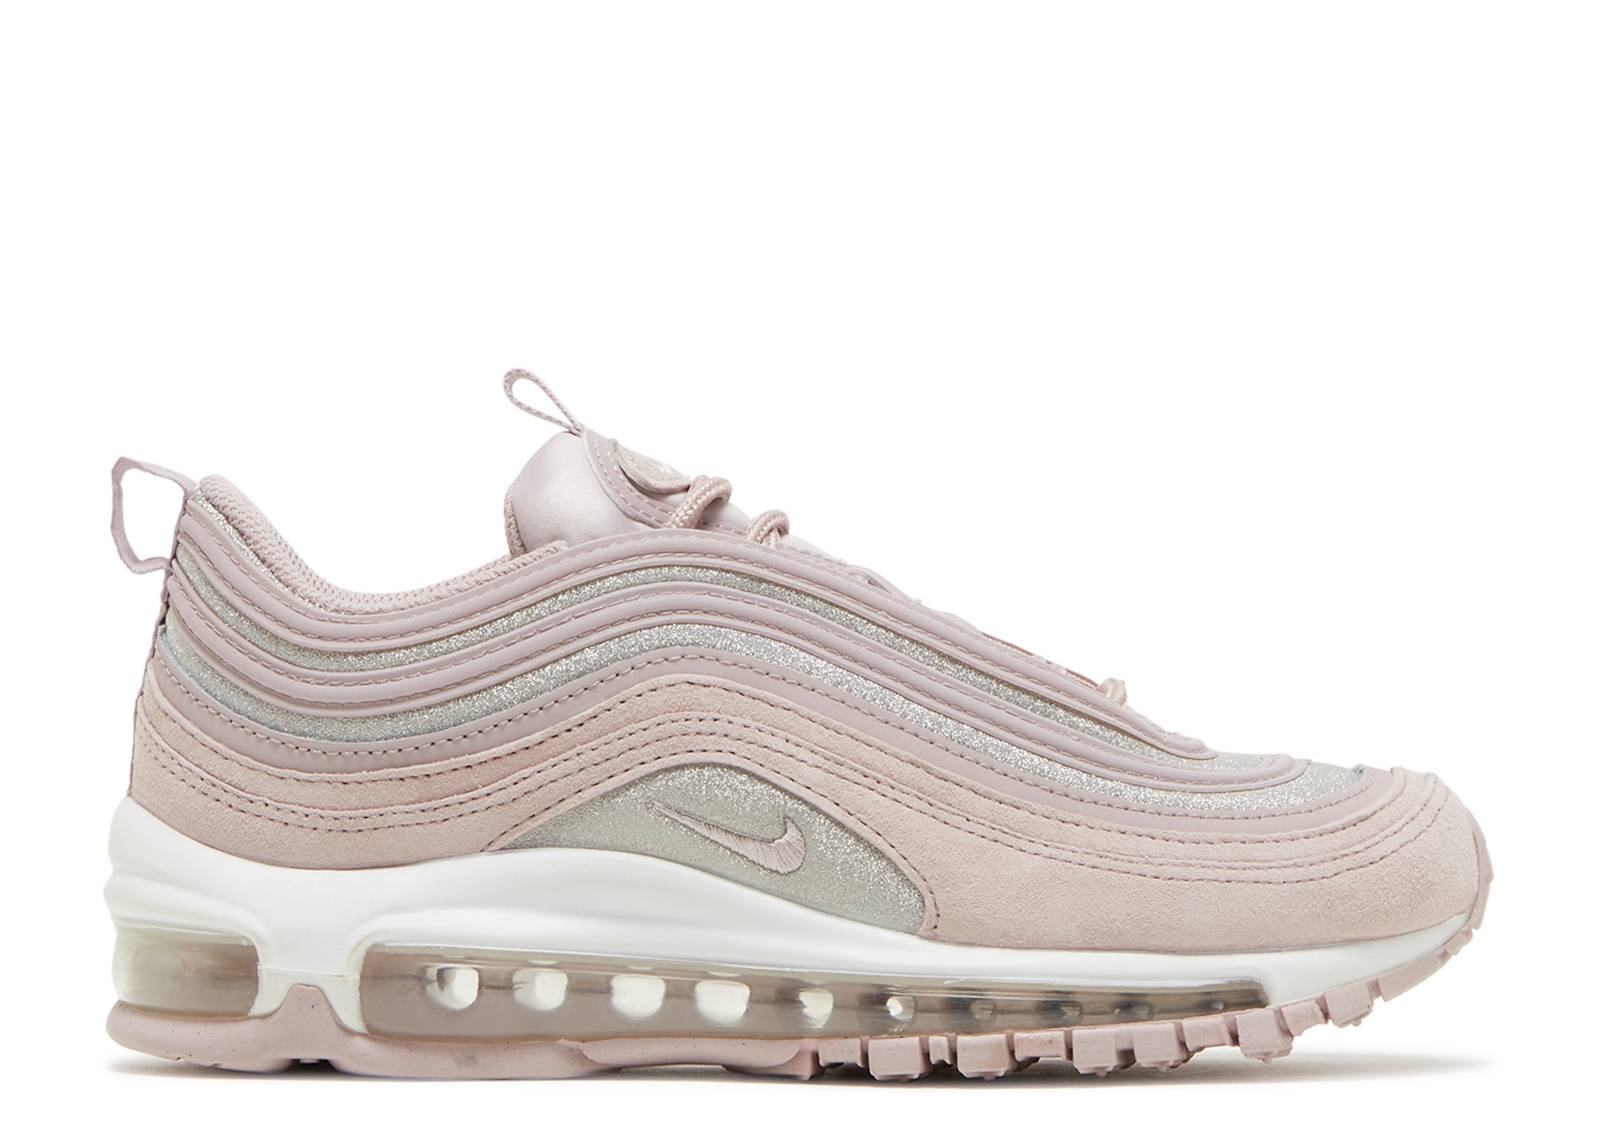 Wmns Air Max 97 'Particle Rose'